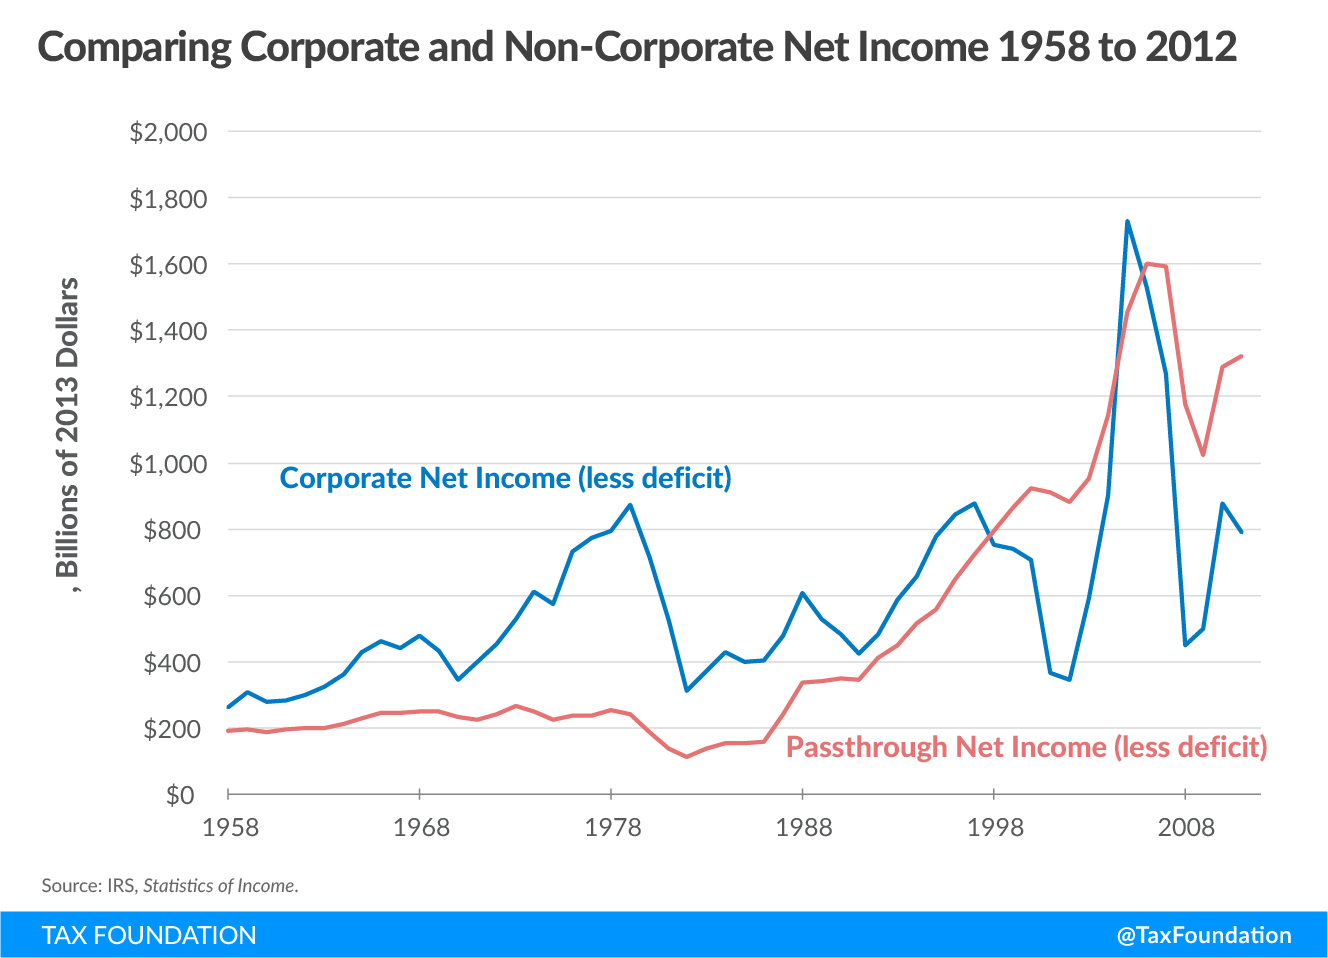 Comparing corporate and non-corporate net income 1958 to 2012, U.S. progressive tax code, income inequality, saez and zucman, 70 percent tax rate income tax inequality